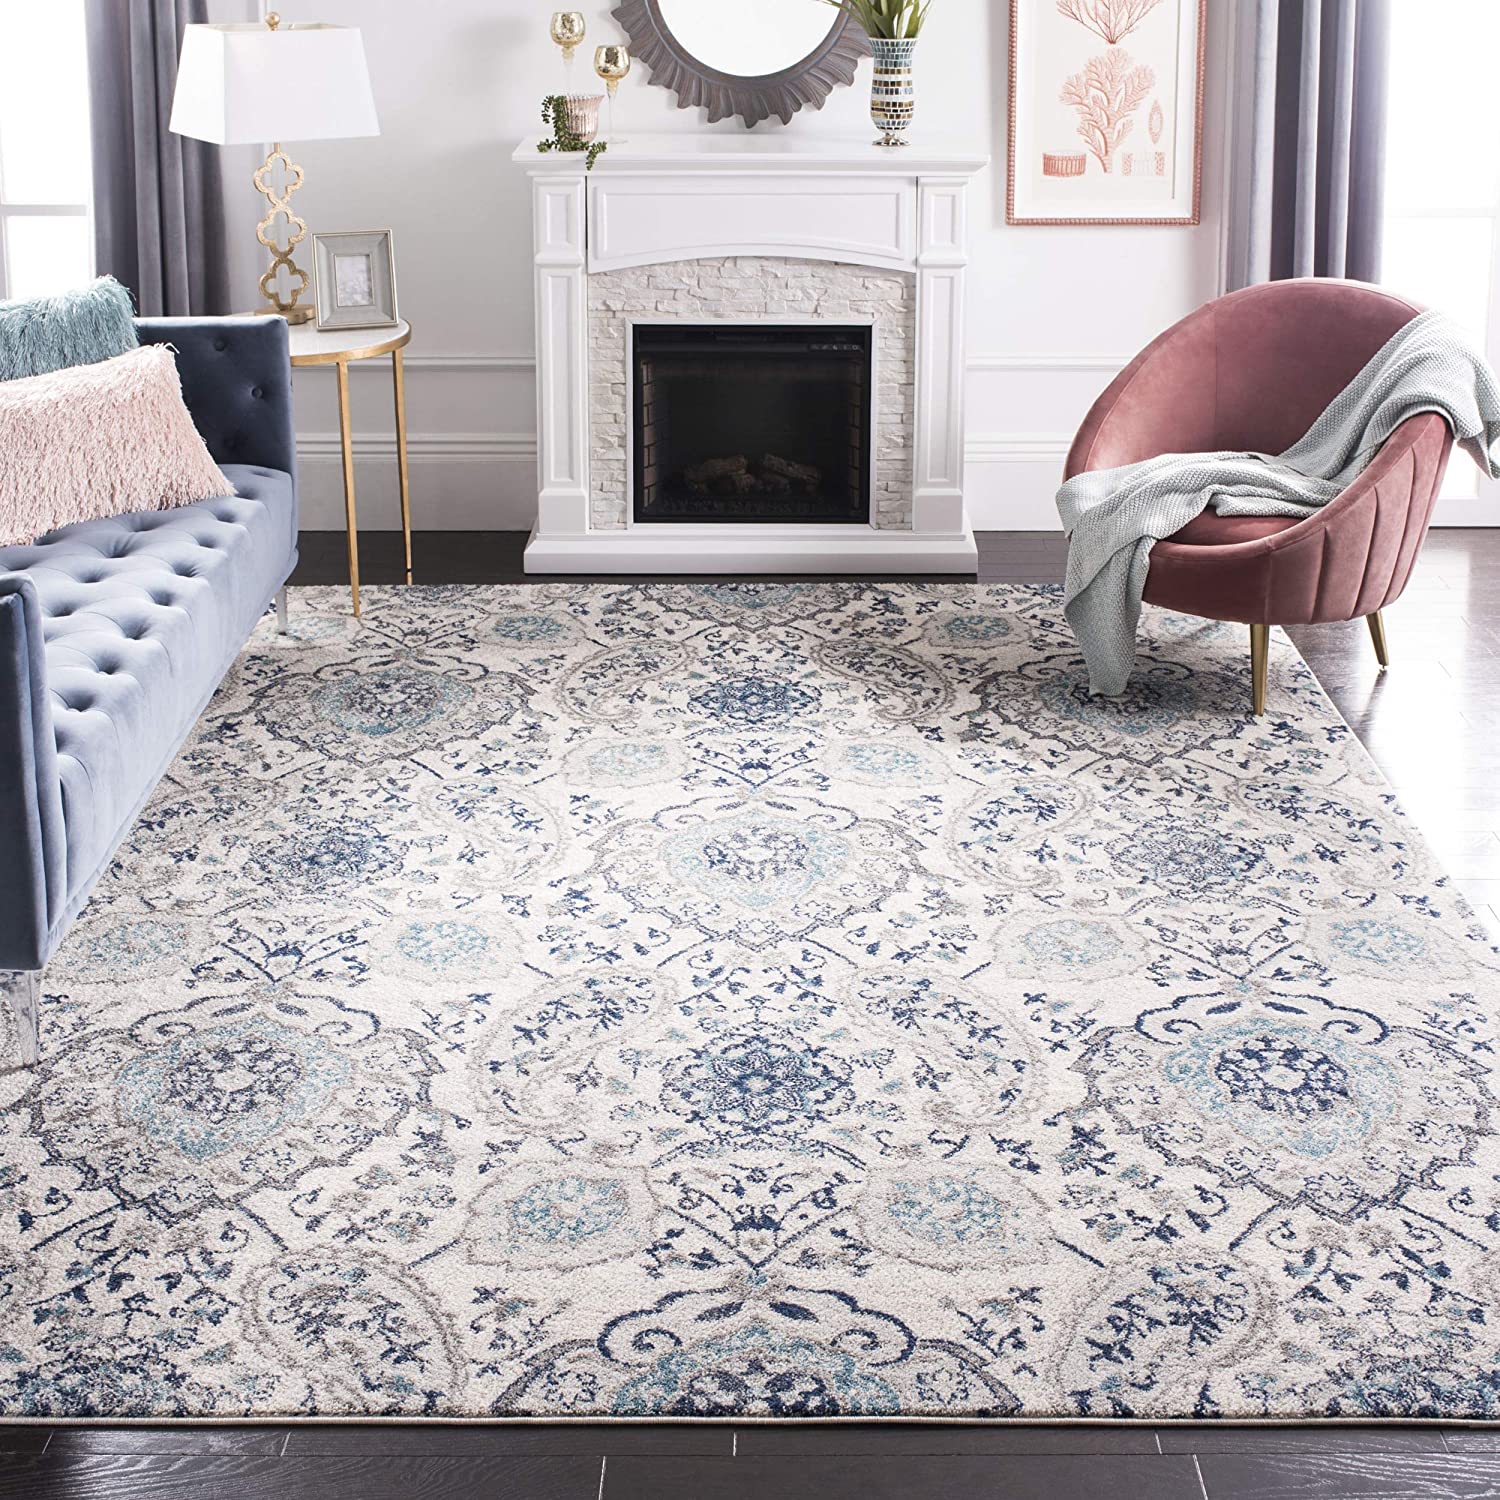 The Best Area Rugs 8 X 10 December 2021, Best Rugs For Living Room 8×10